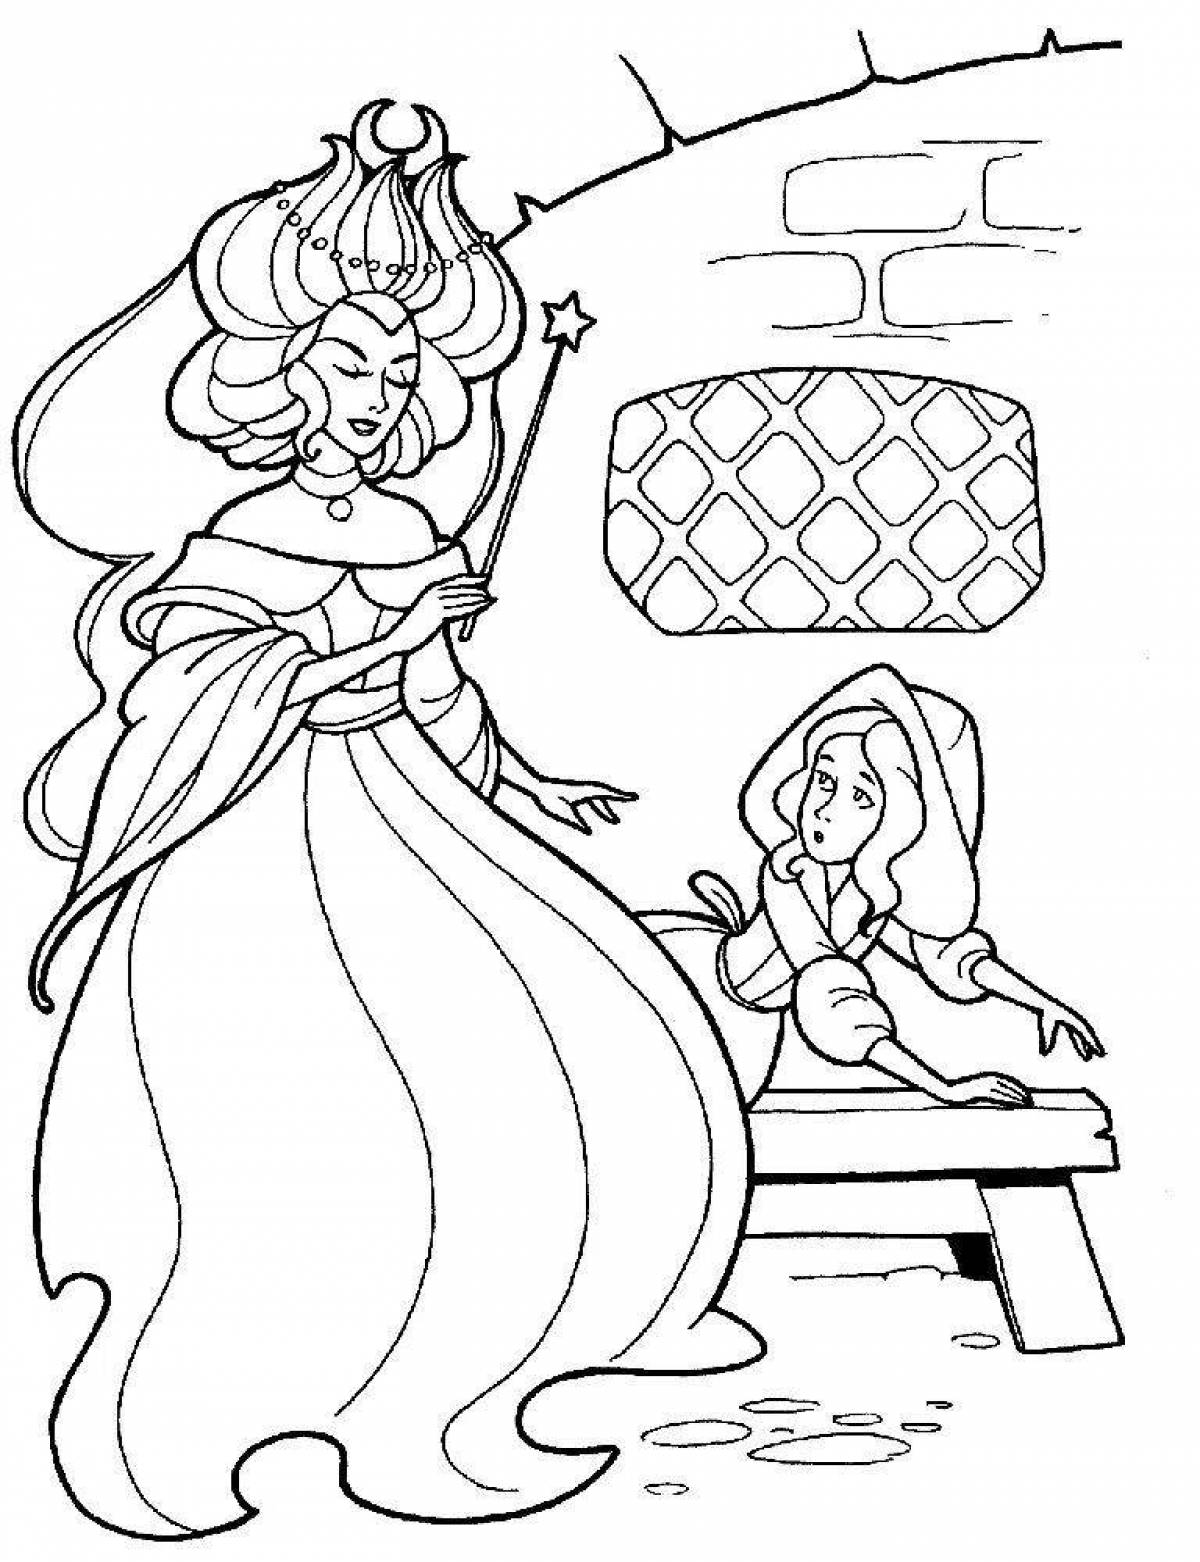 Magic coloring book from perrault's tales